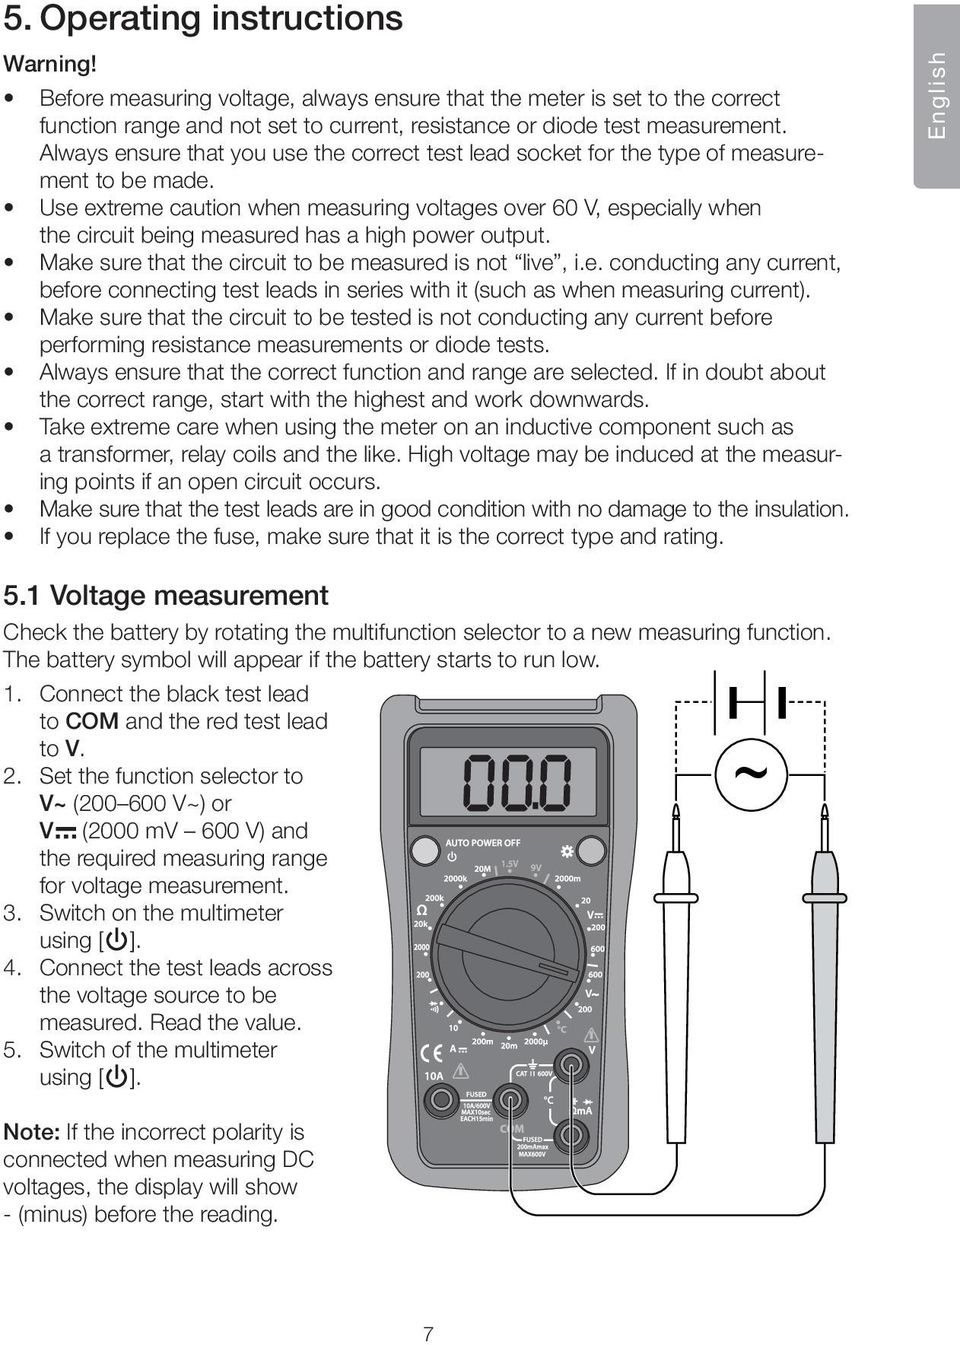 Use extreme caution when measuring voltages over 60 V, especially when the circuit being measured has a high power output. Make sure that the circuit to be measured is not live, i.e. conducting any current, before connecting test leads in series with it (such as when measuring current).